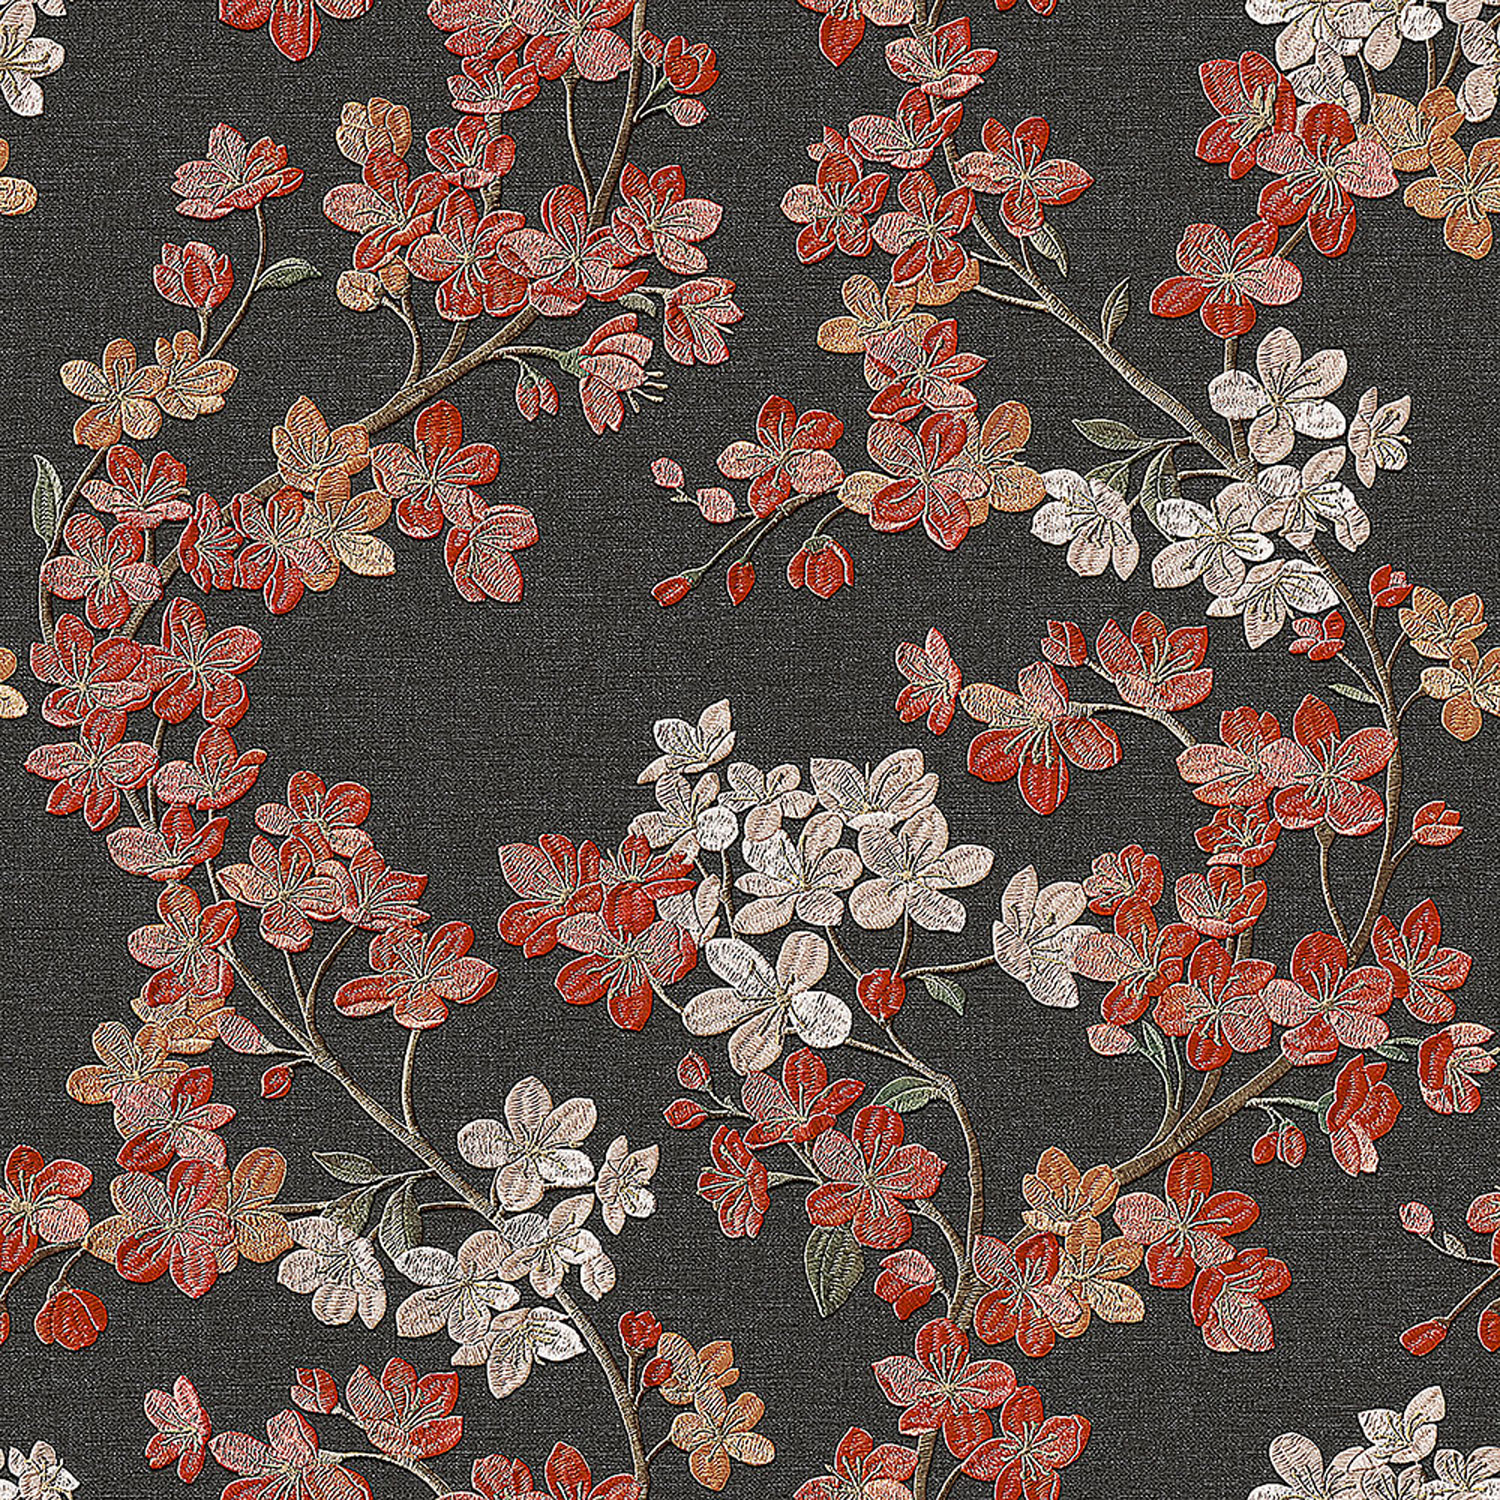 Luxury black non-woven floral wallpaper GR322207, Grace, Design ID, Wallpapers Vavex • More than 12000 designs • Wall murals